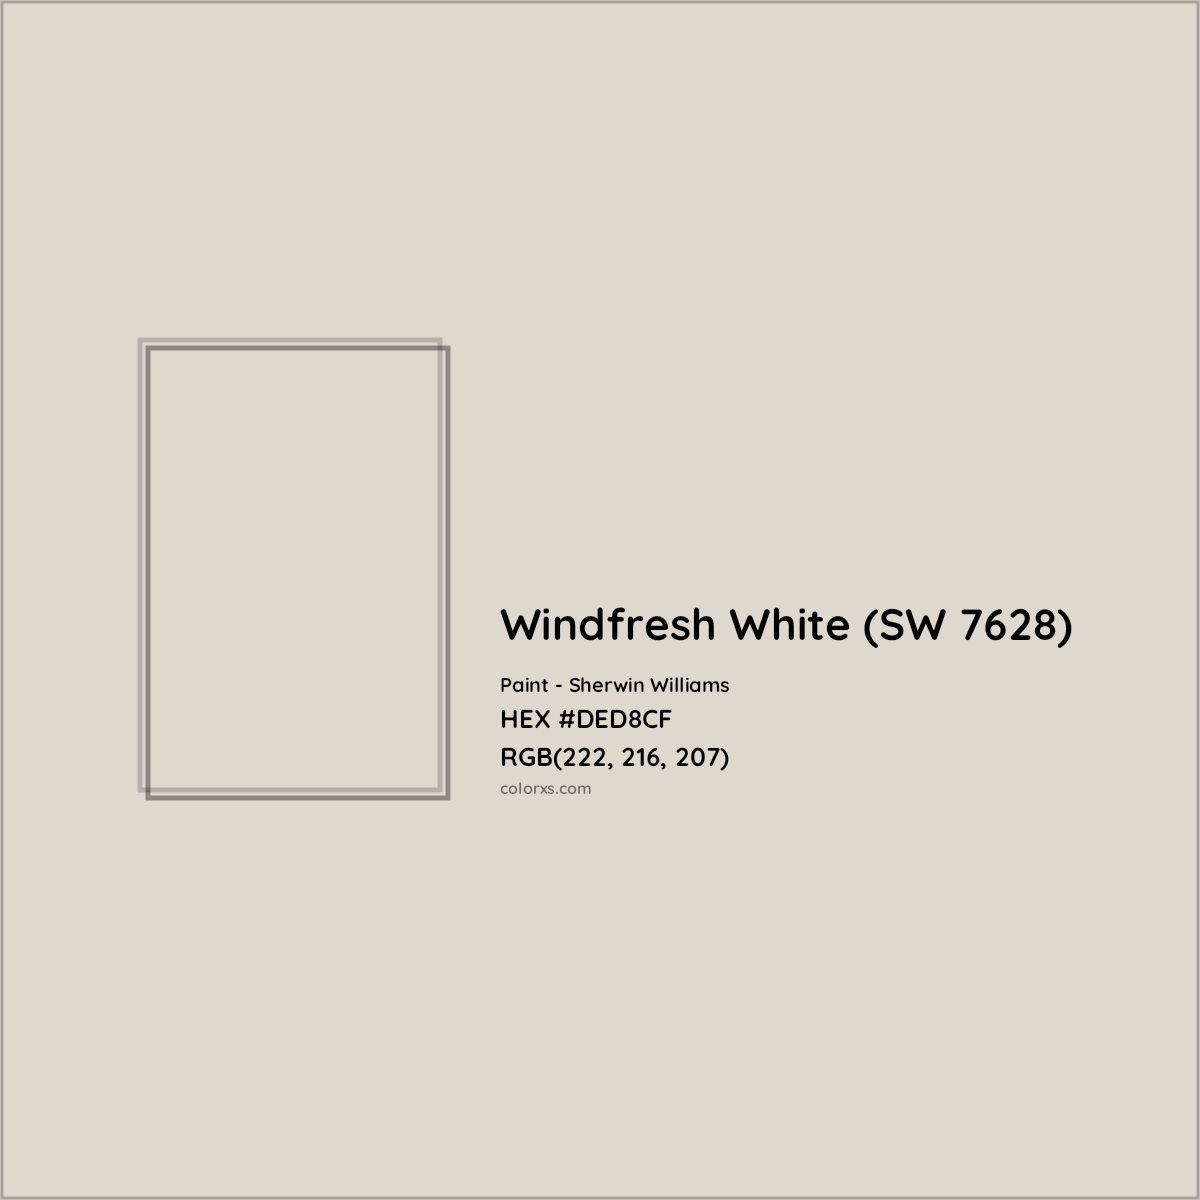 HEX #DED8CF Windfresh White (SW 7628) Paint Sherwin Williams - Color Code